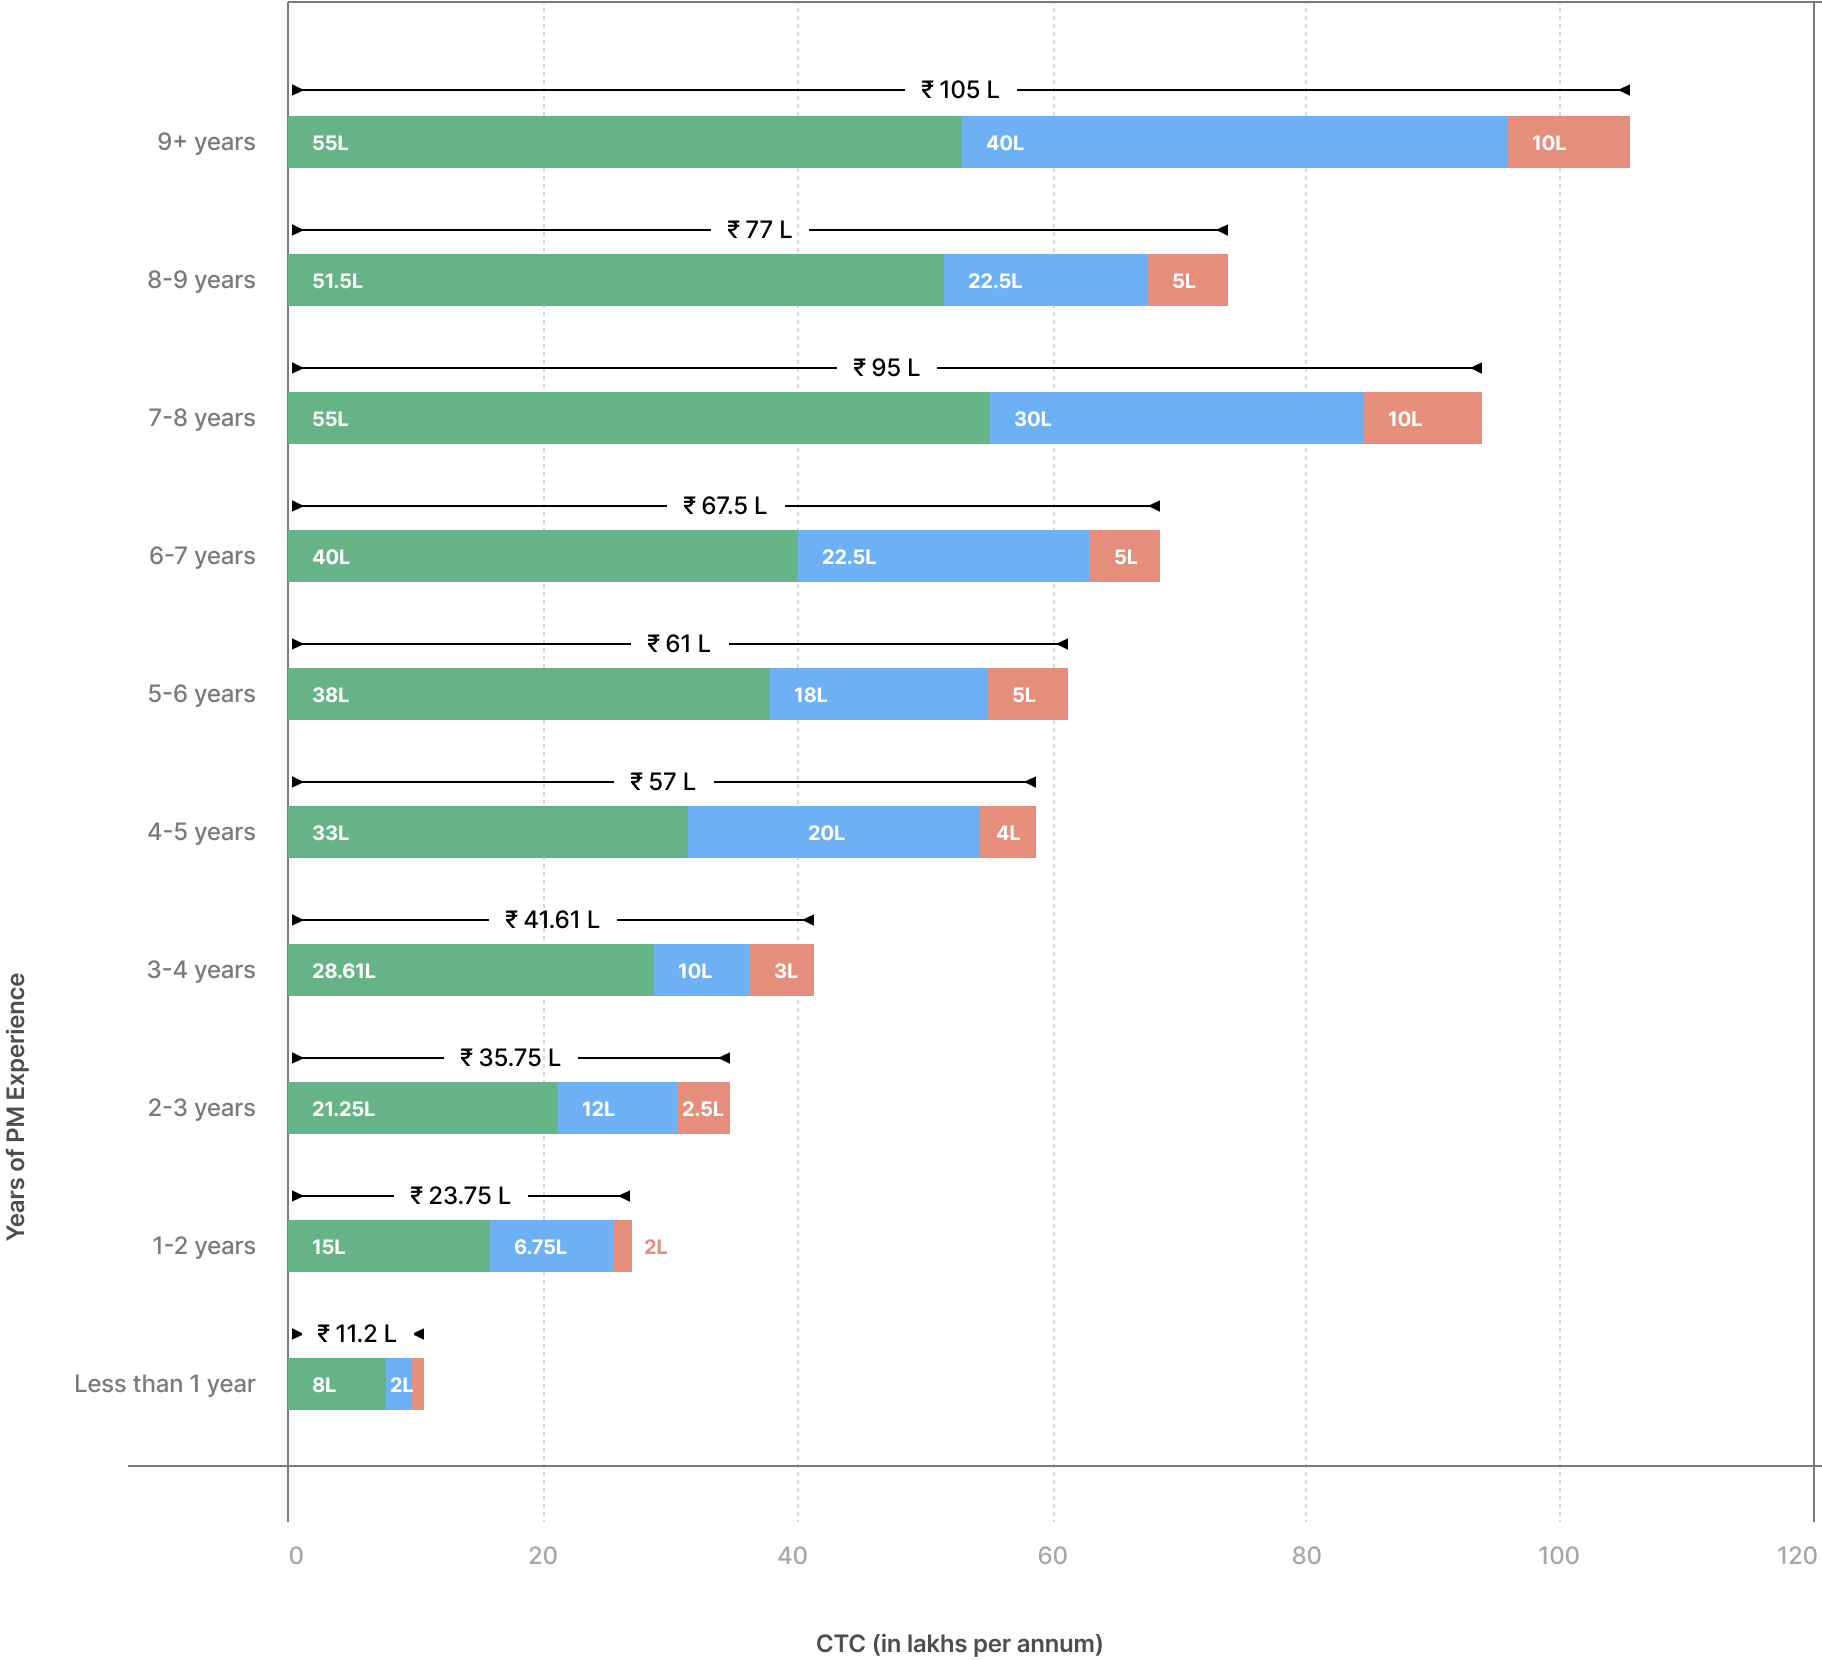 Median pay based on years of product management experience